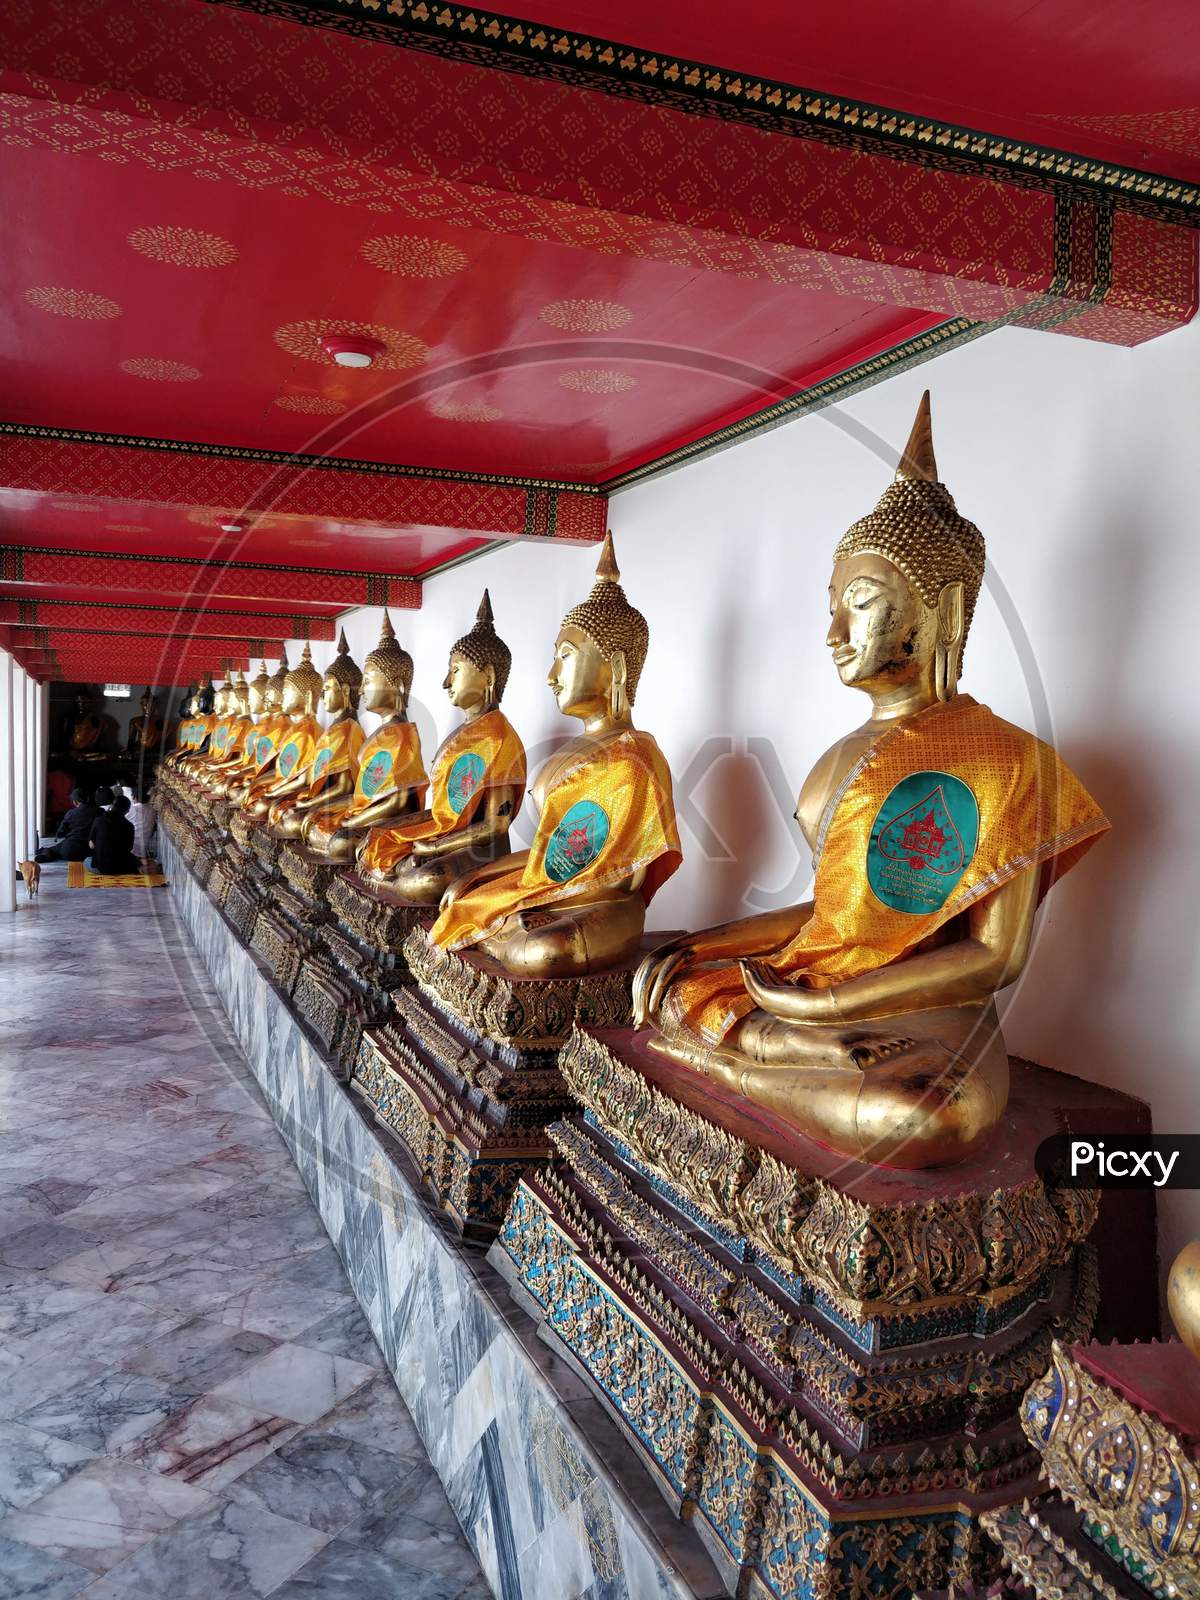 Buddha statues in a temple